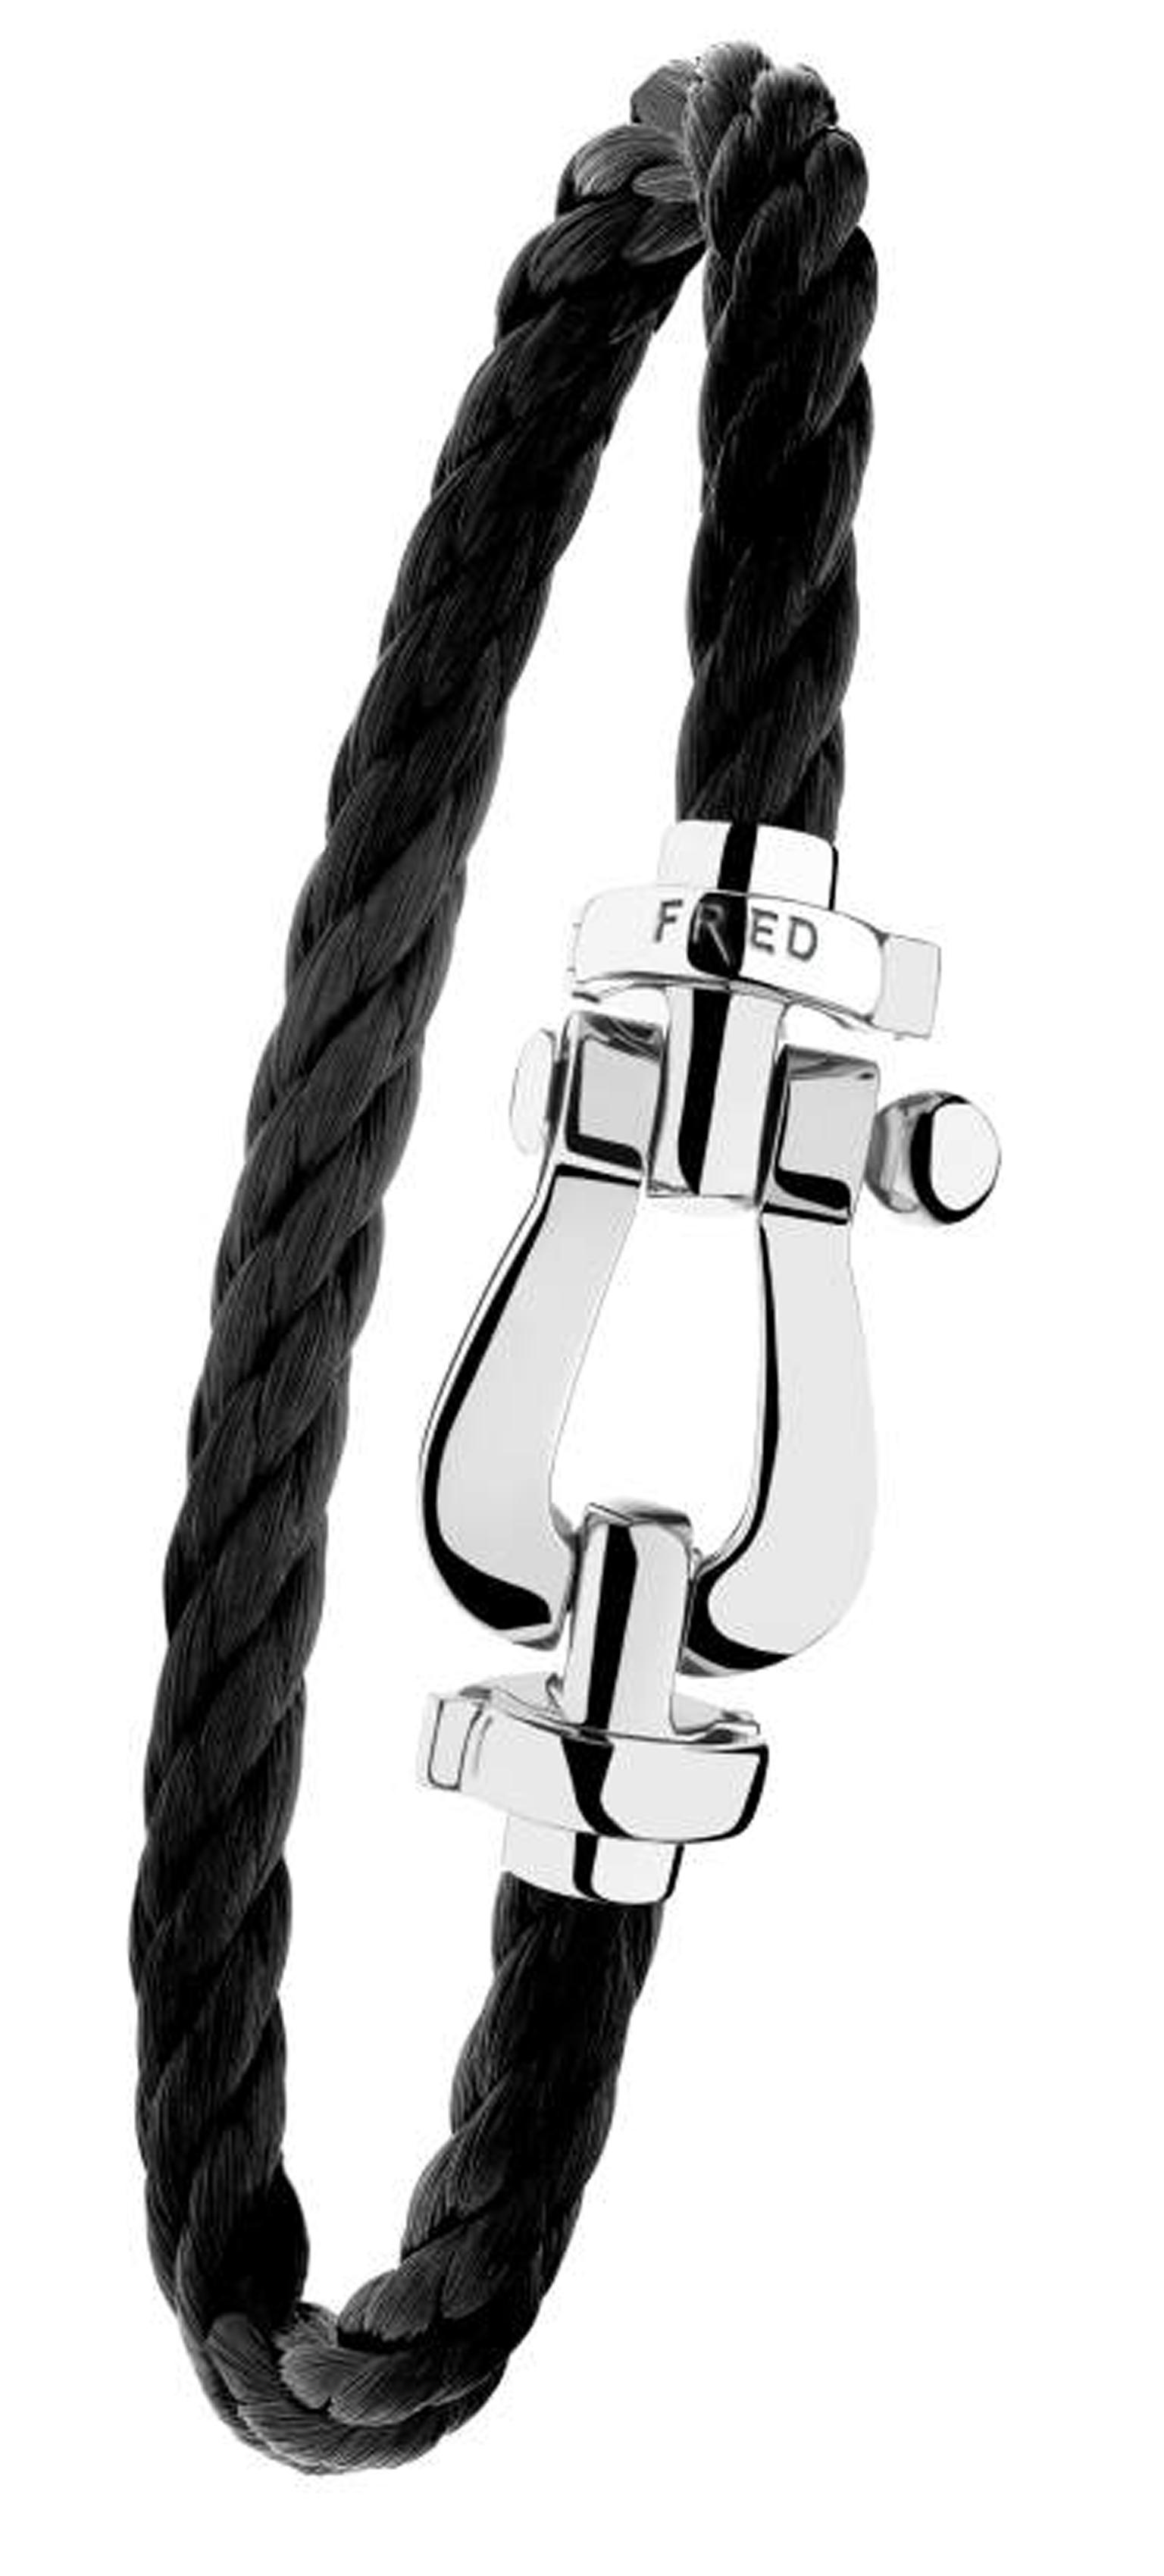 Fred jewelry- Force 10 Collection